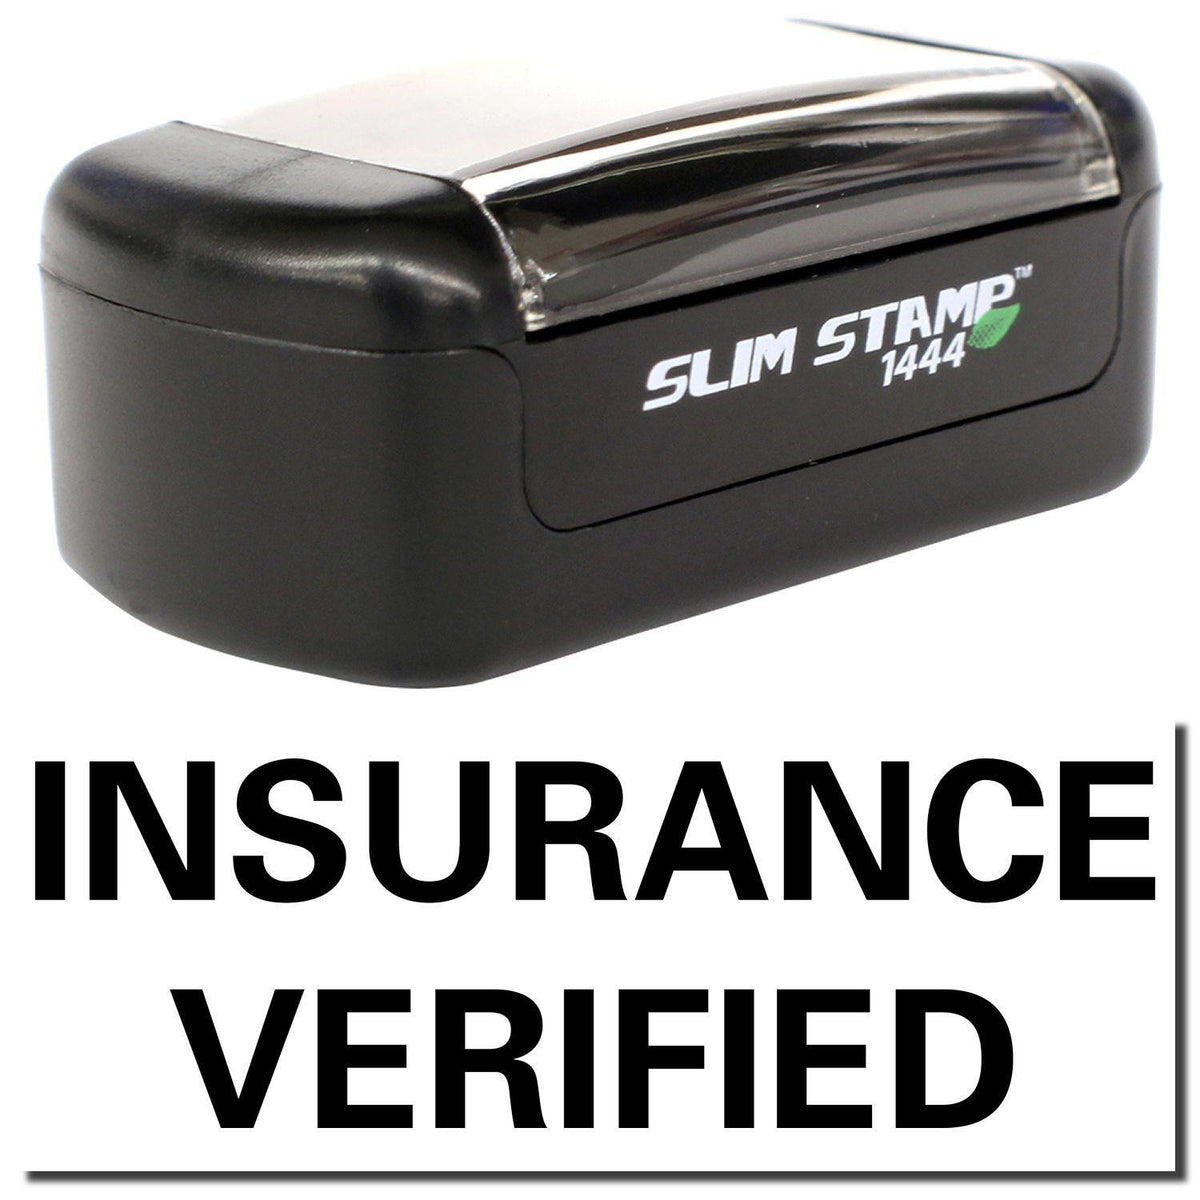 A stock office pre-inked stamp with a stamped image showing how the text &quot;INSURANCE VERIFIED&quot; is displayed after stamping.